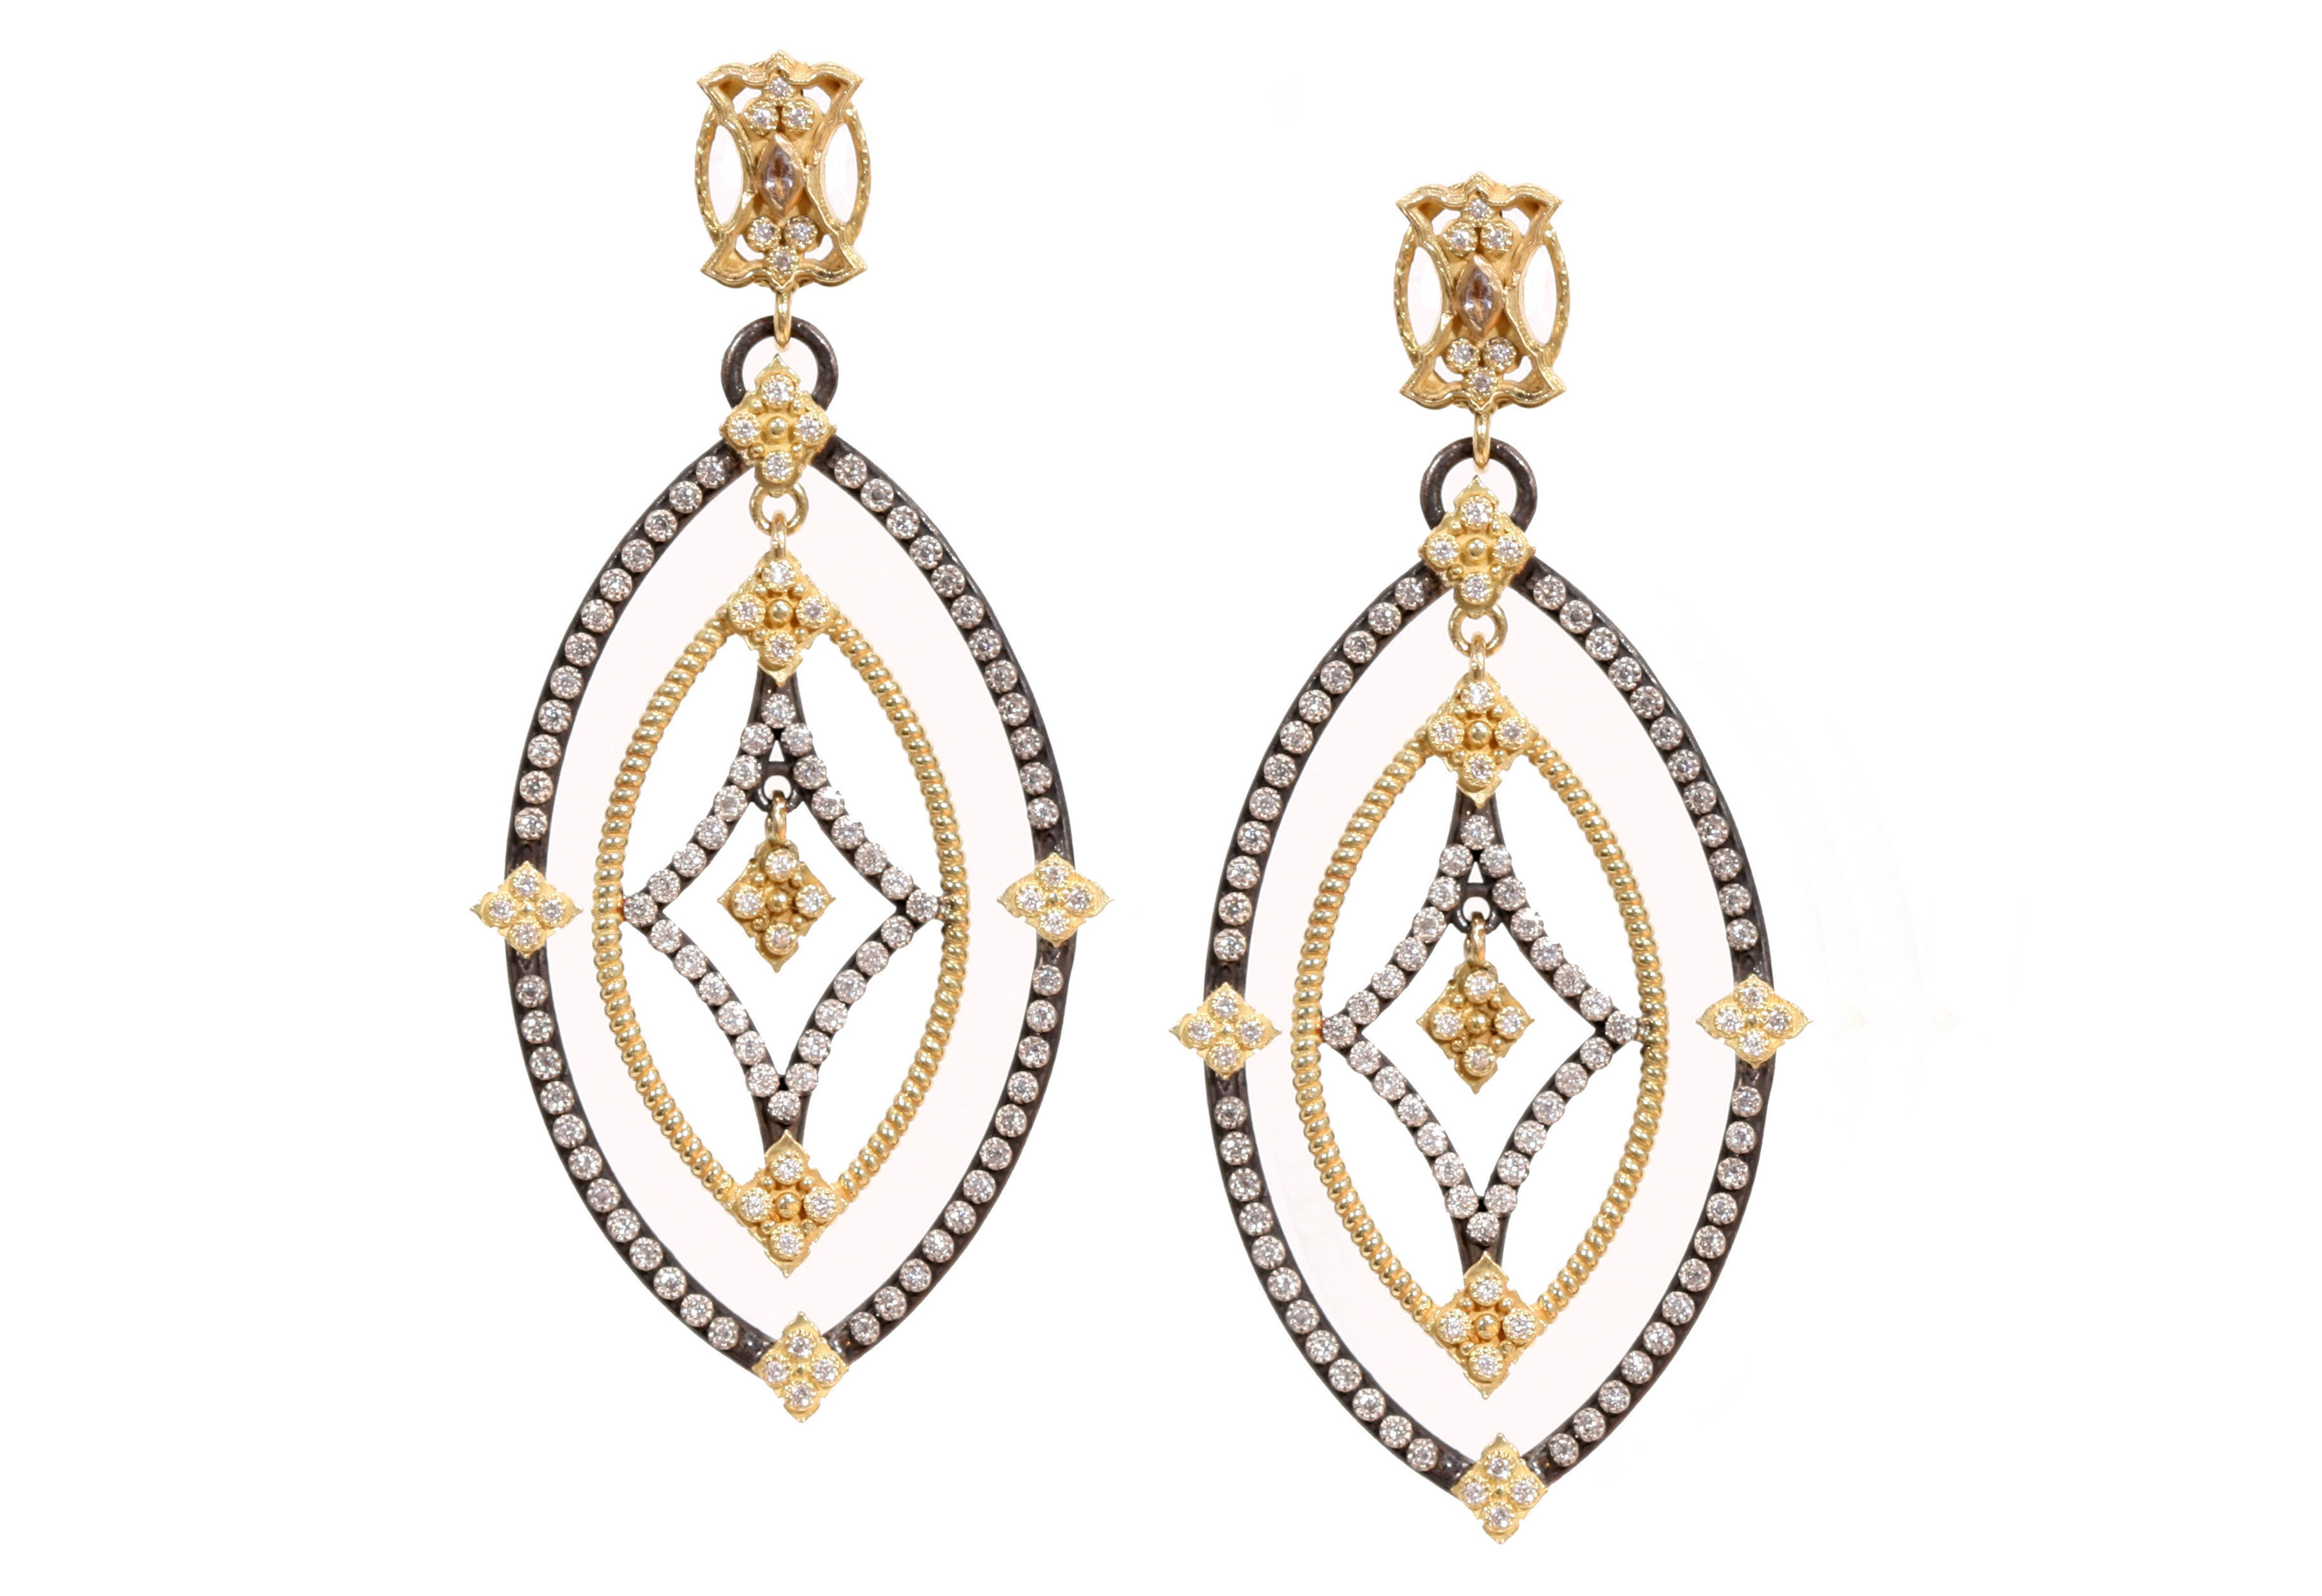 ARMENTA 18K YELLOW GOLD AND STERLING SILVER DIAMOND EARRINGS 02414